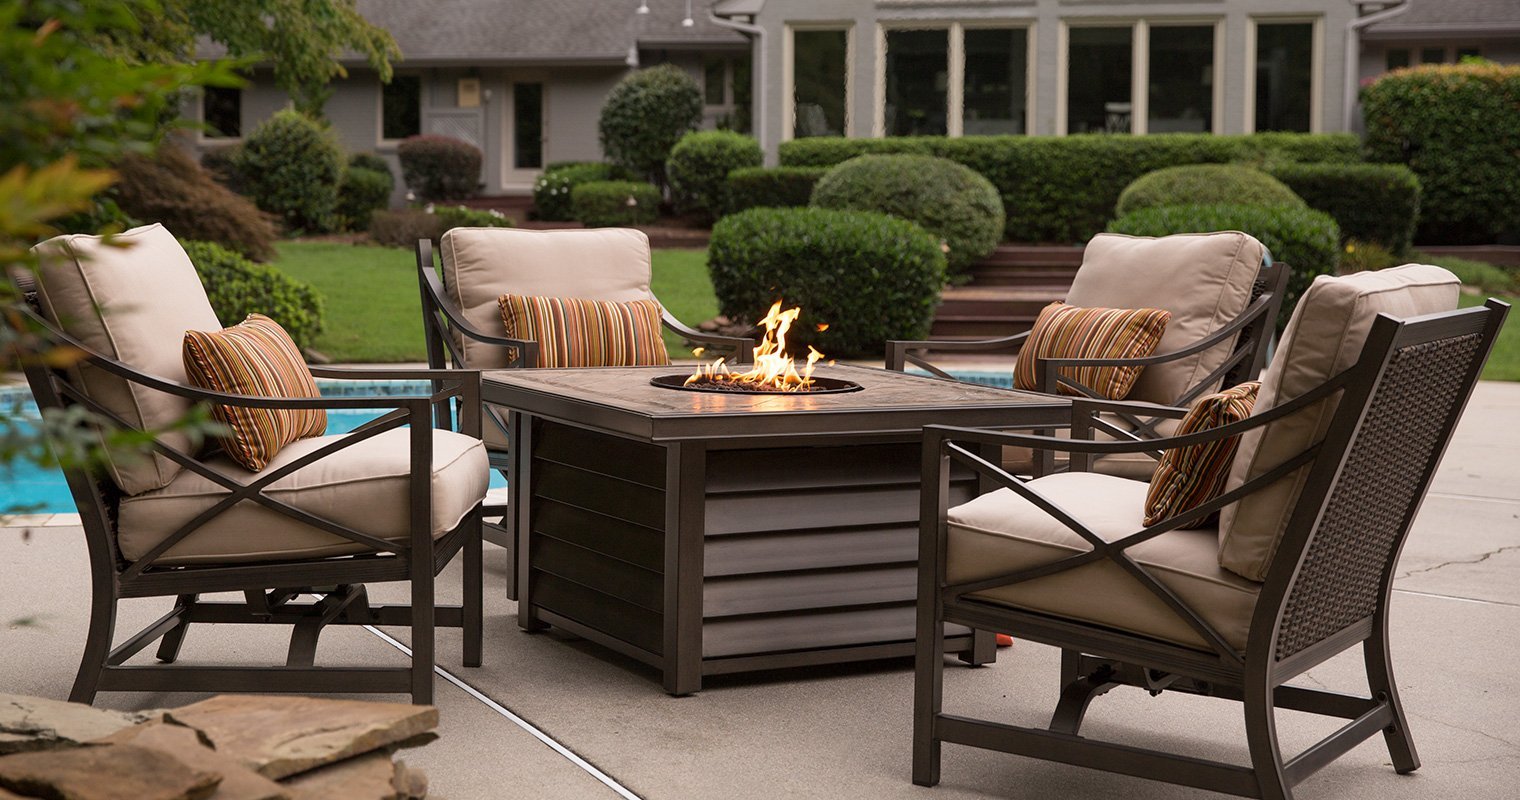 Enhance Outdoor Living Space With An Agio Fire Pit - Starfire Direct